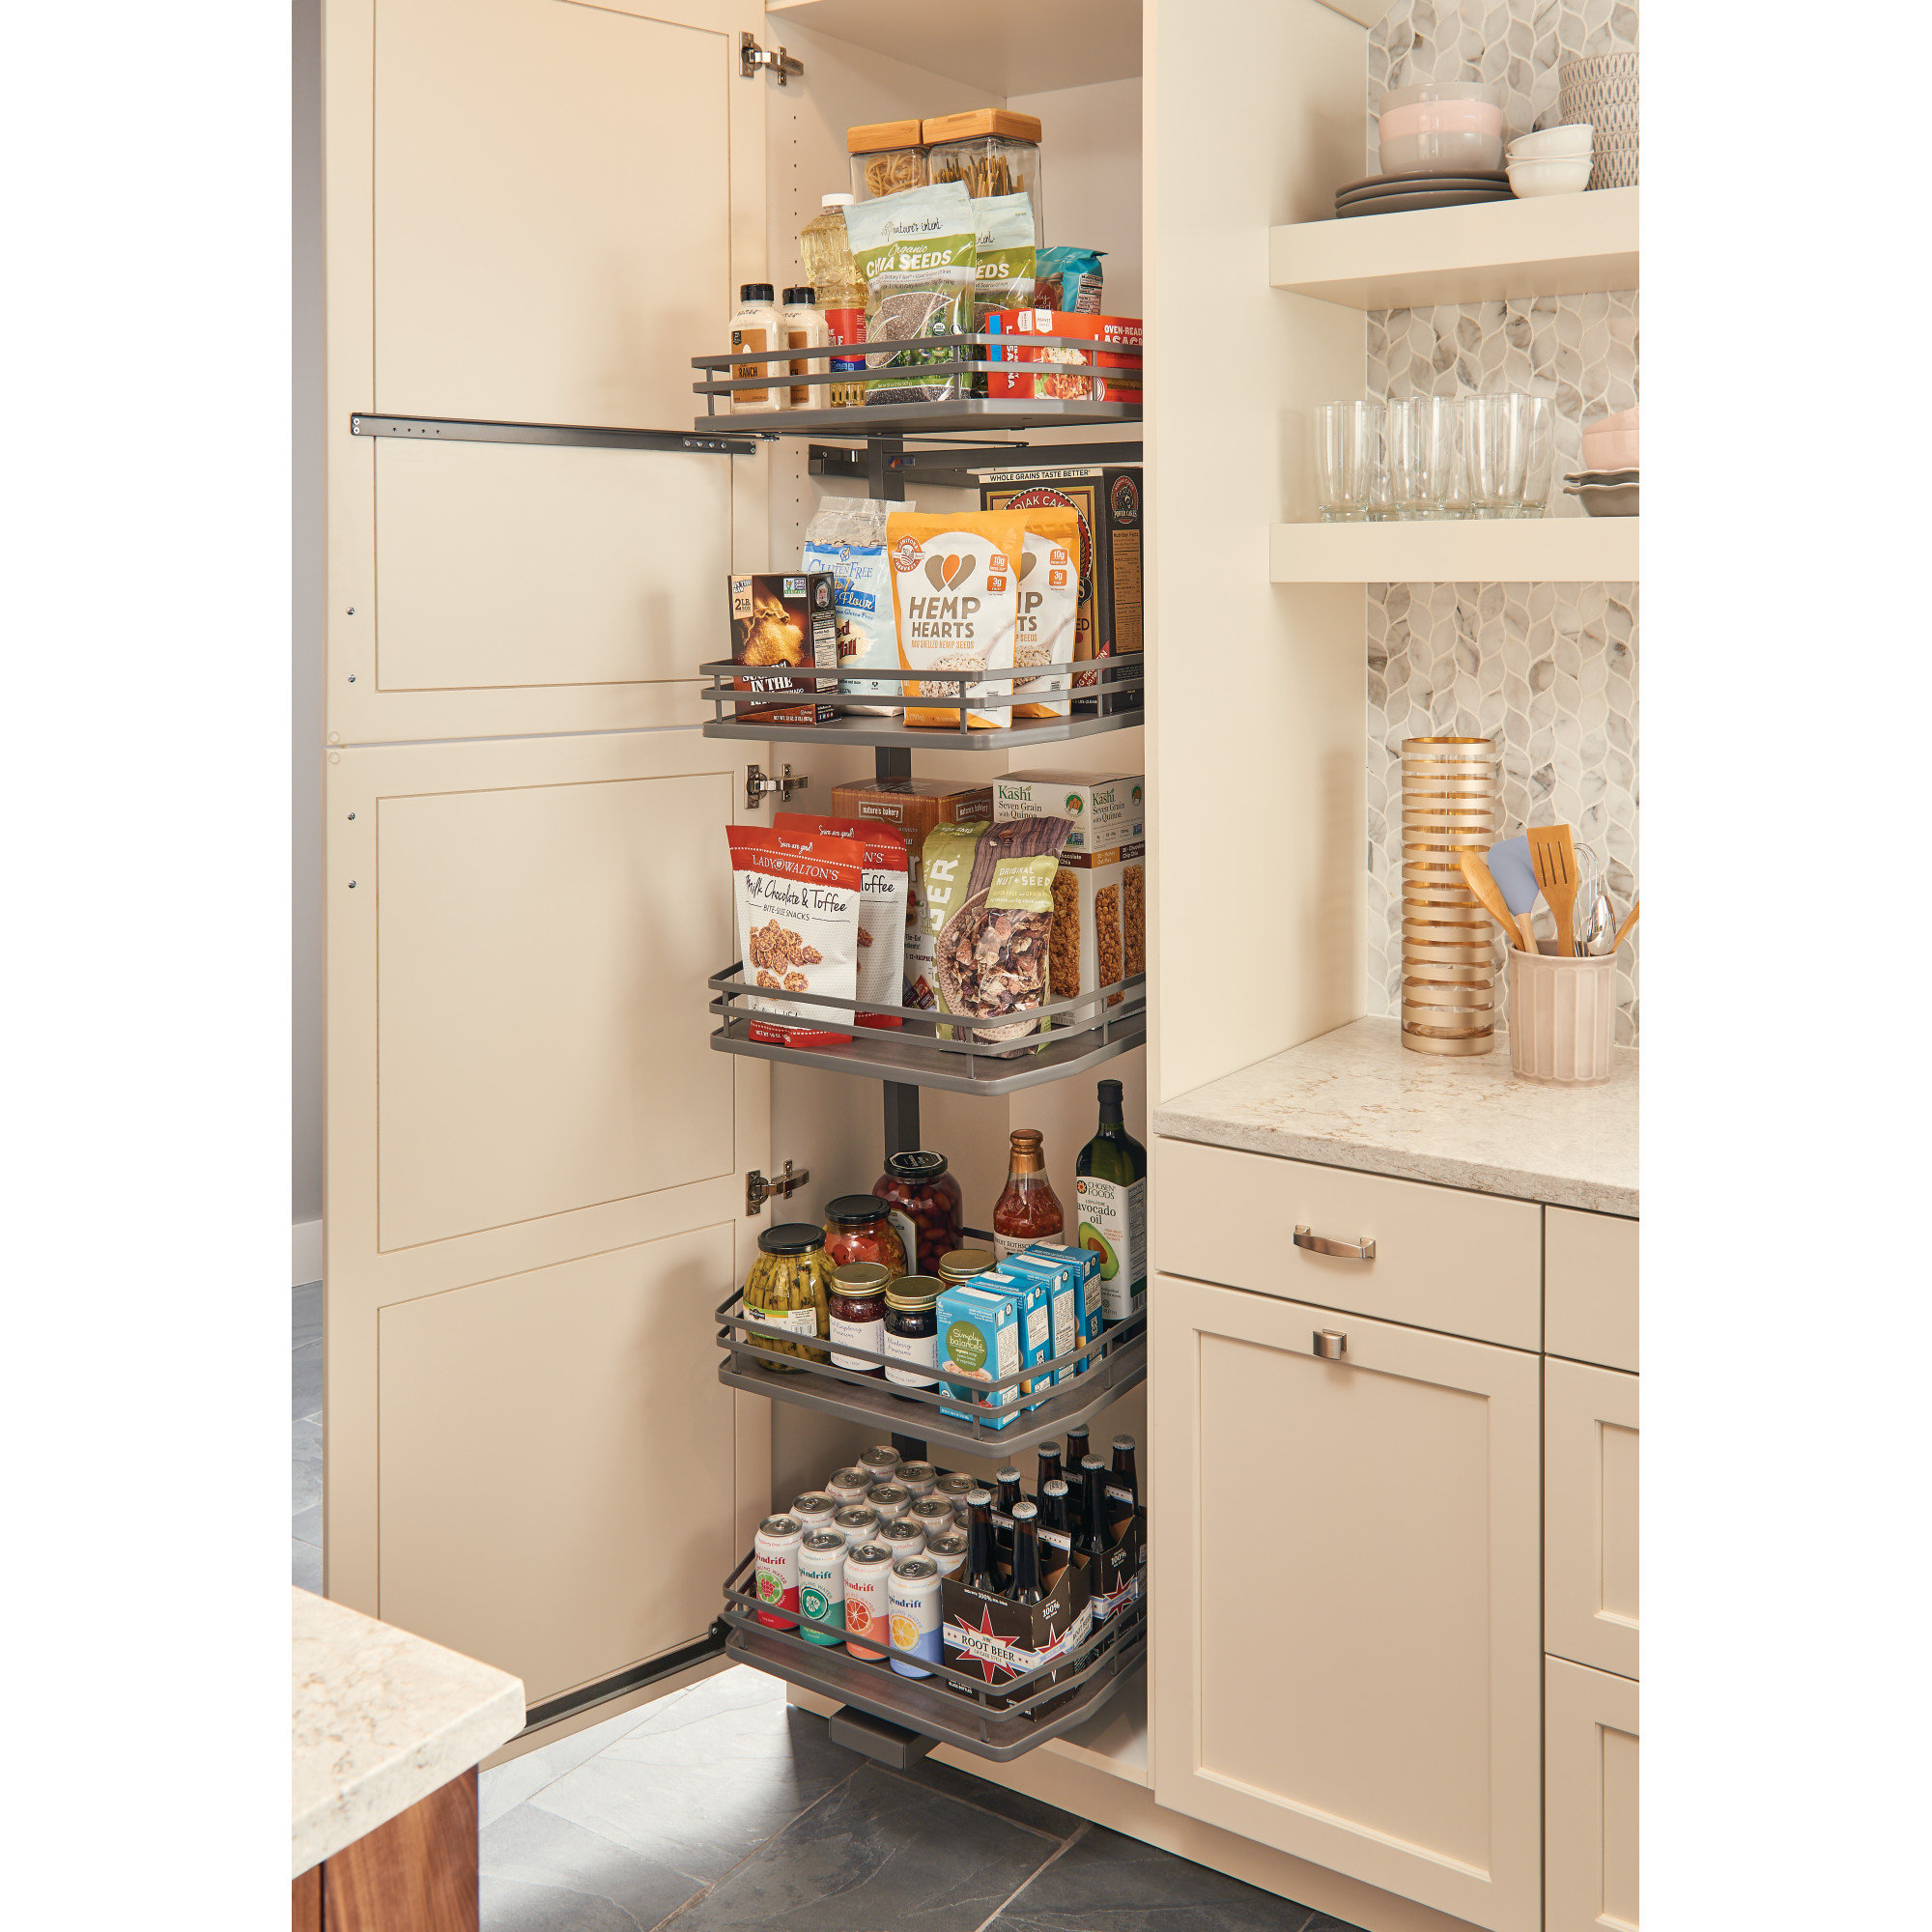 HOLD N' STORAGE Pull Out Cabinet Organizer, Heavy Duty-with Lifetime  Limited -14 W x 21 D - Requires At Least a Cabinet Opening, Steel Metal cabinet  drawers slide out, Chrome Finish 